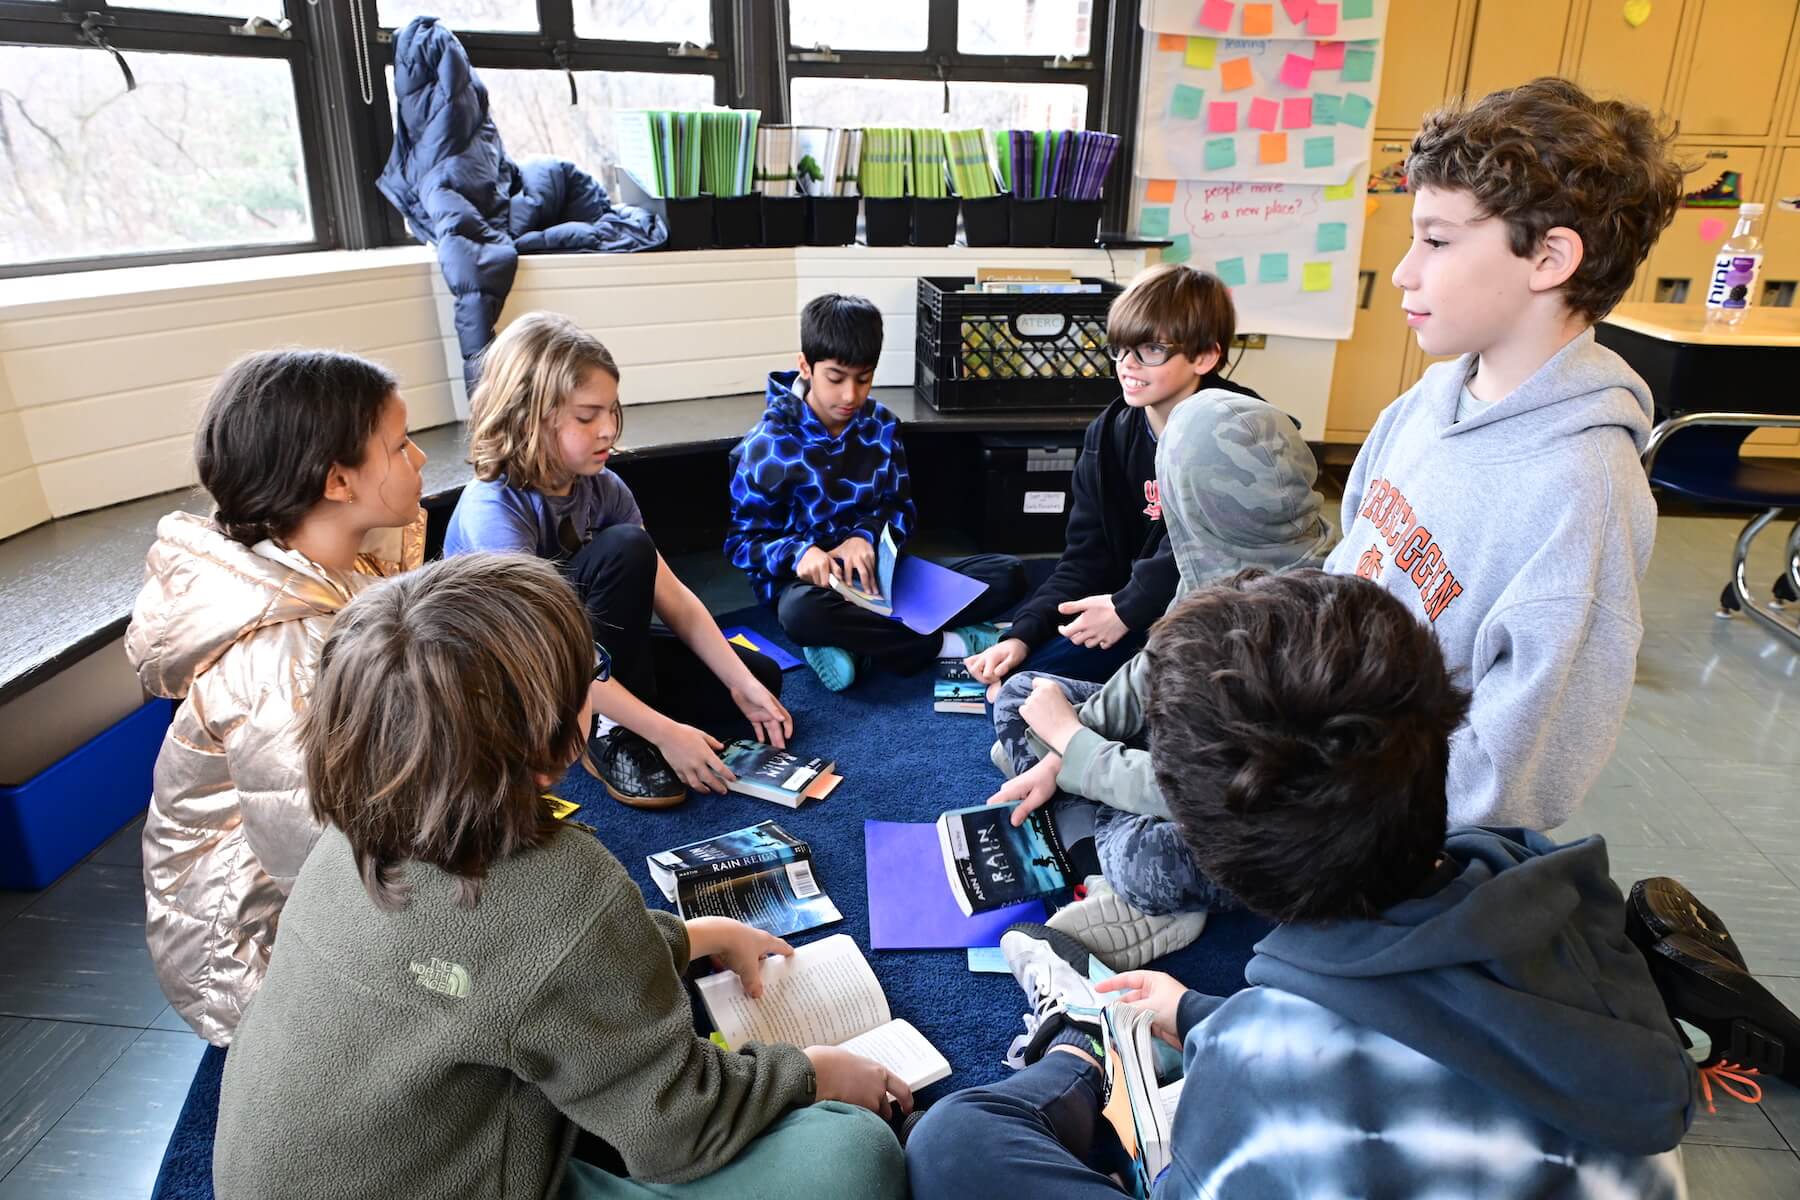 Ethical Culture Fieldston School Fieldston Lower 4th graders sitting in circle discussion during book club unit